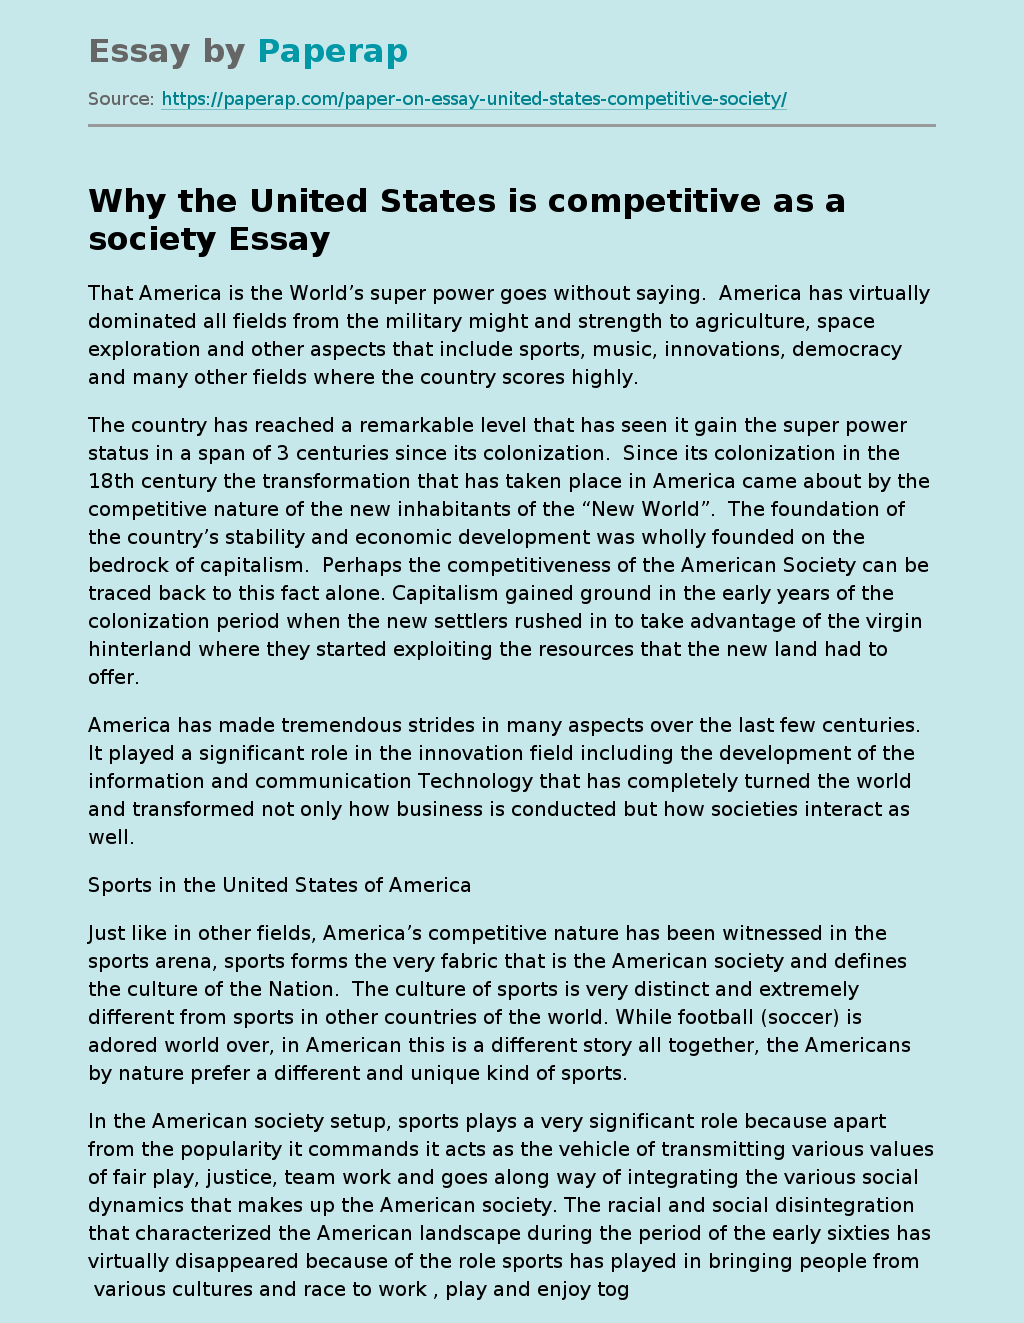 Why the United States is Competitive as a Society